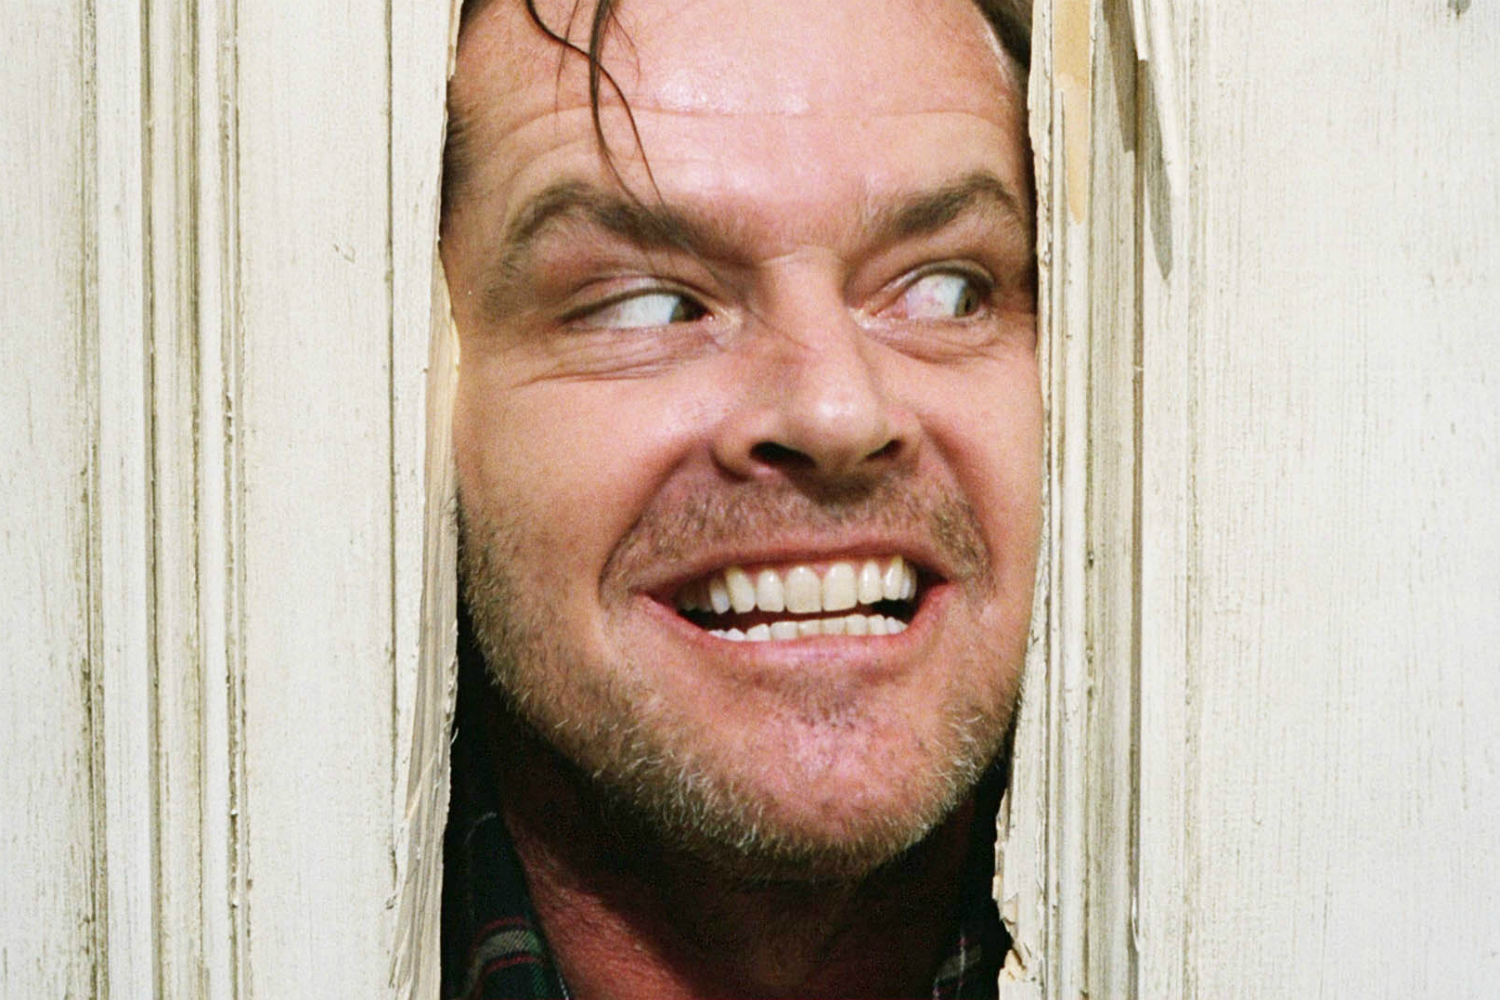 Jack Torrance looking through a hole in a door in "The Shining."